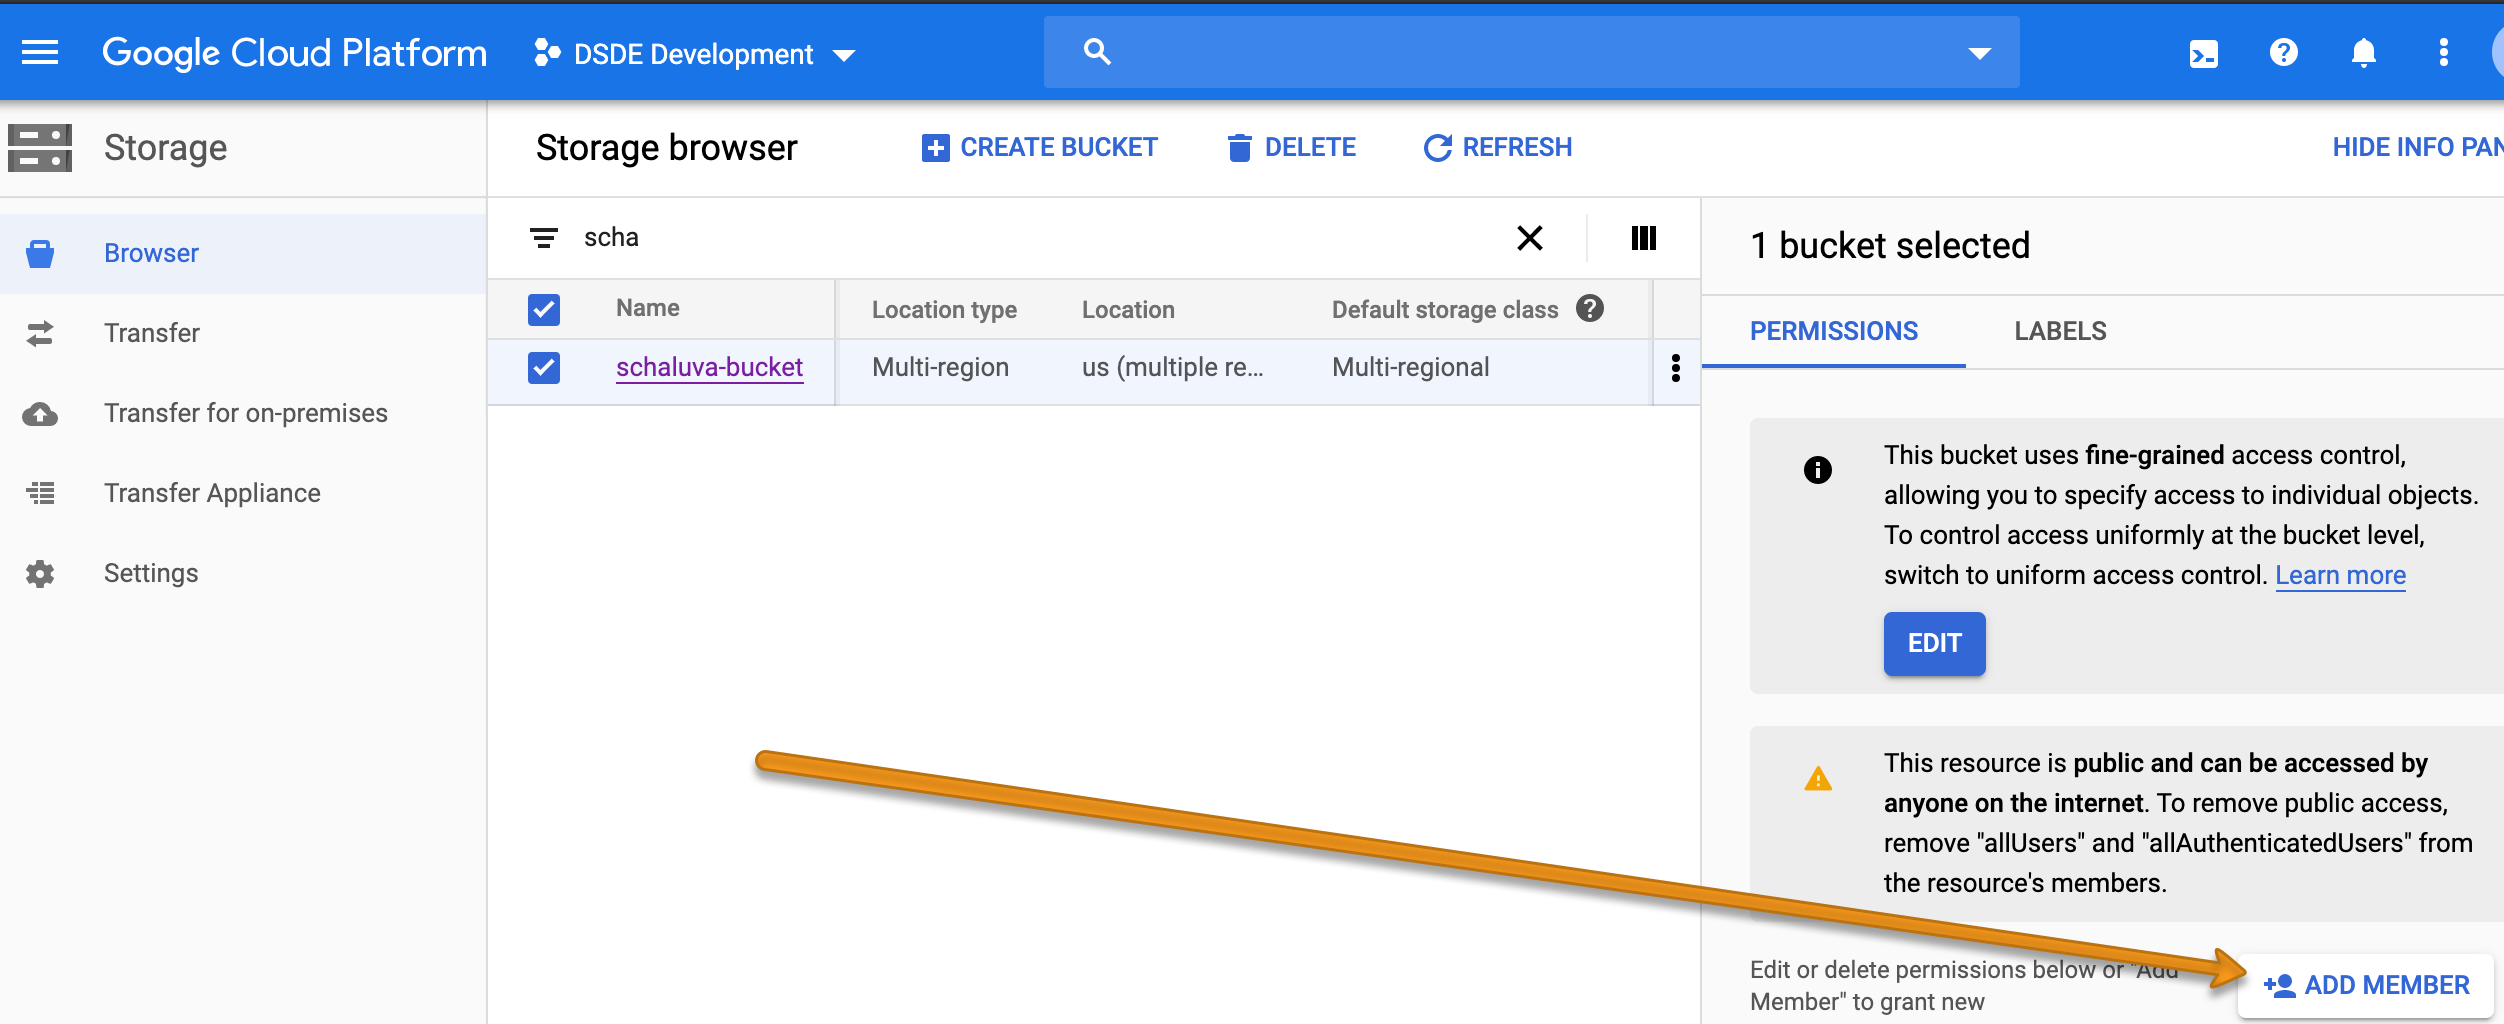 Screenshot of bucket in storage browser in GCP console with arrow pointing to the add members button at bottom right